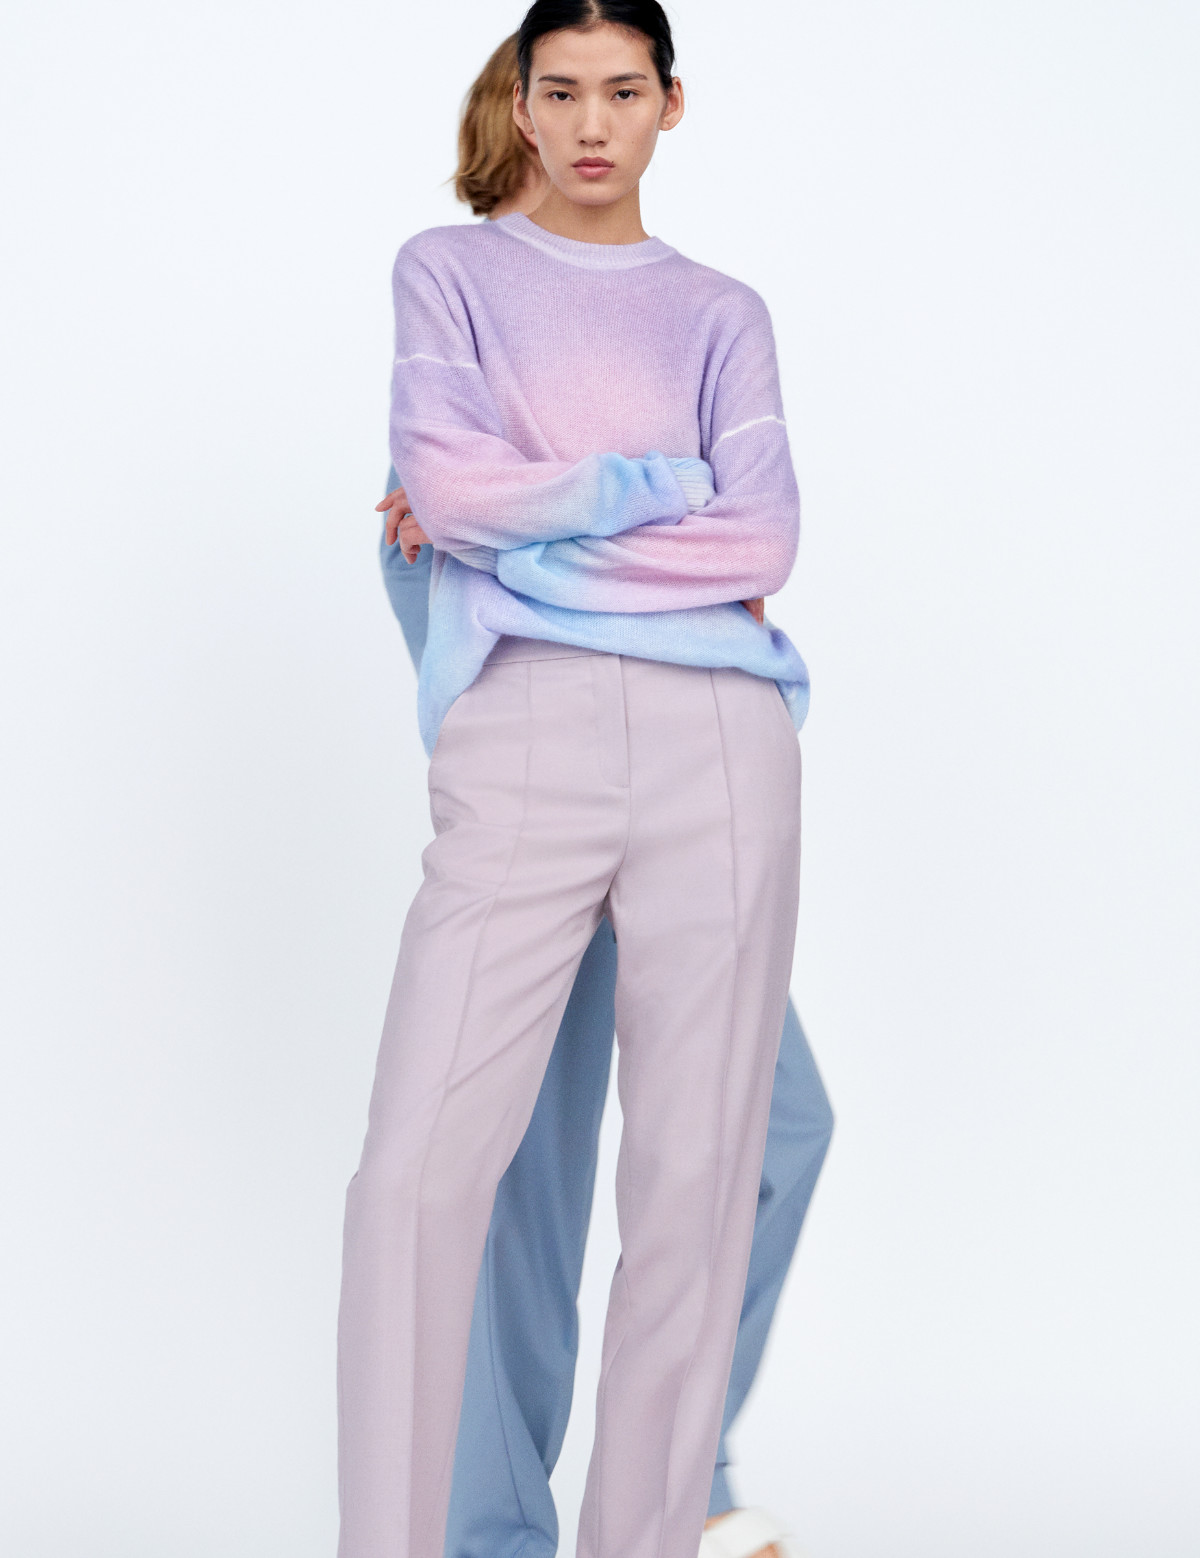 ICICLE Presents Its Spring Summer 2022 Collection - Luxferity Magazine